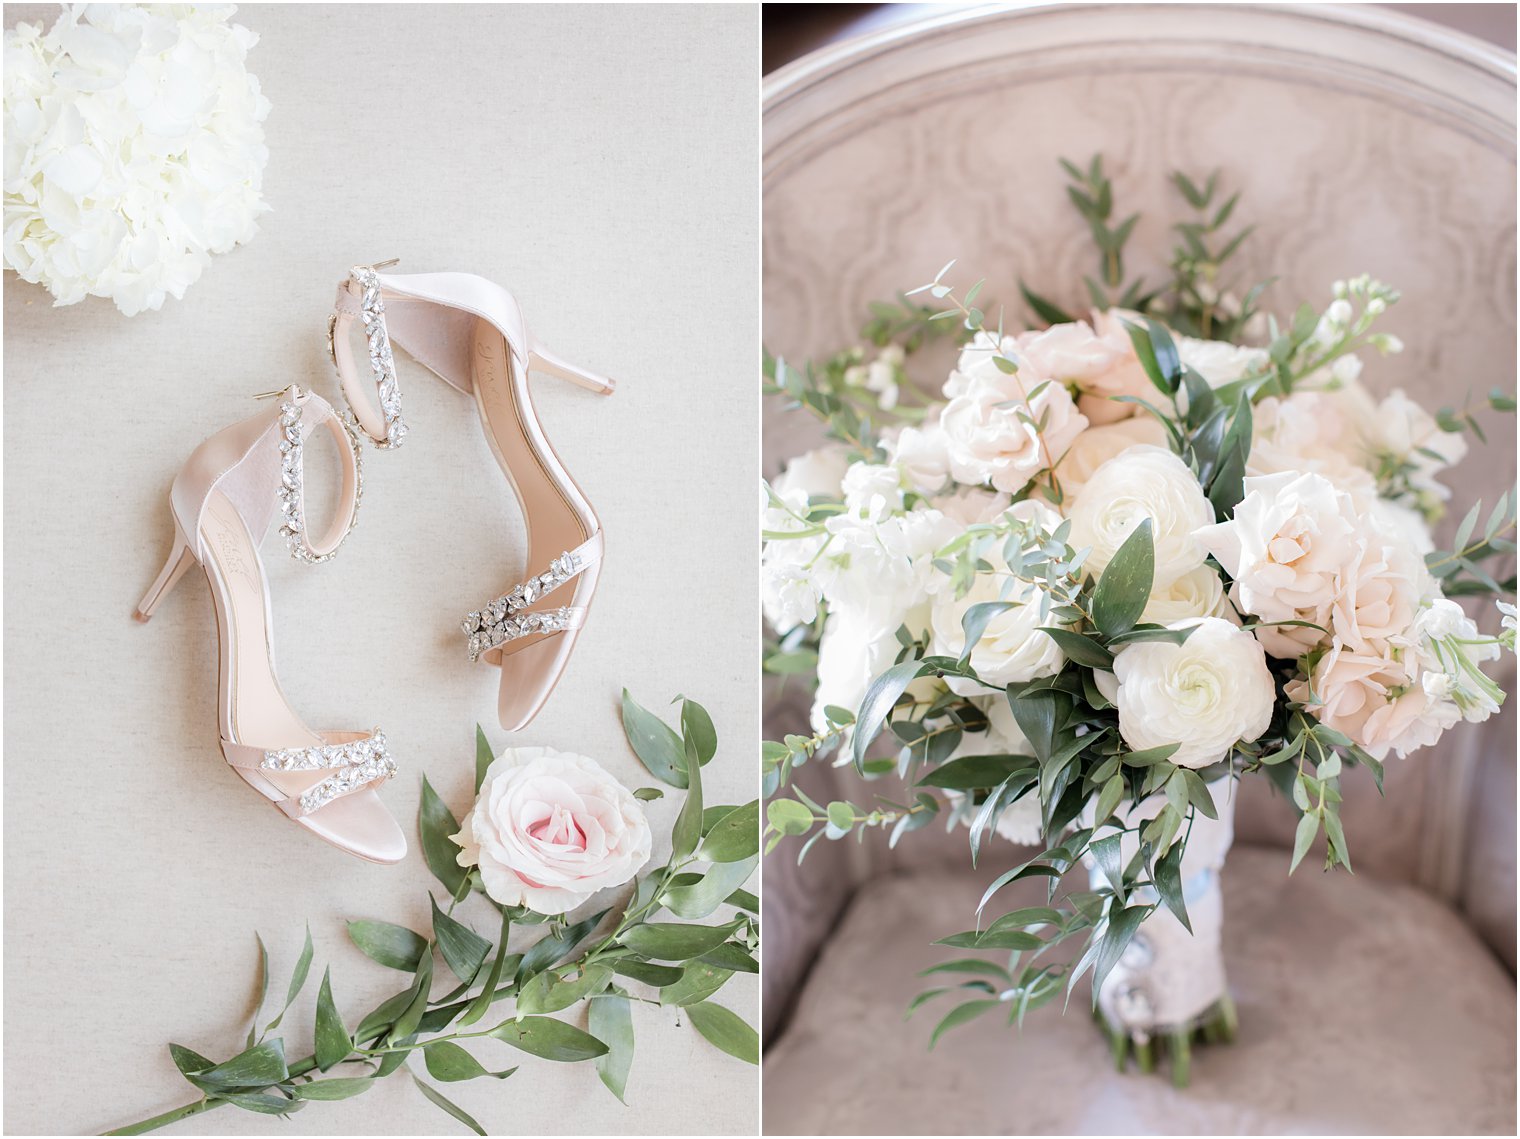 Wedding shoes and florals by Laurelwood Design